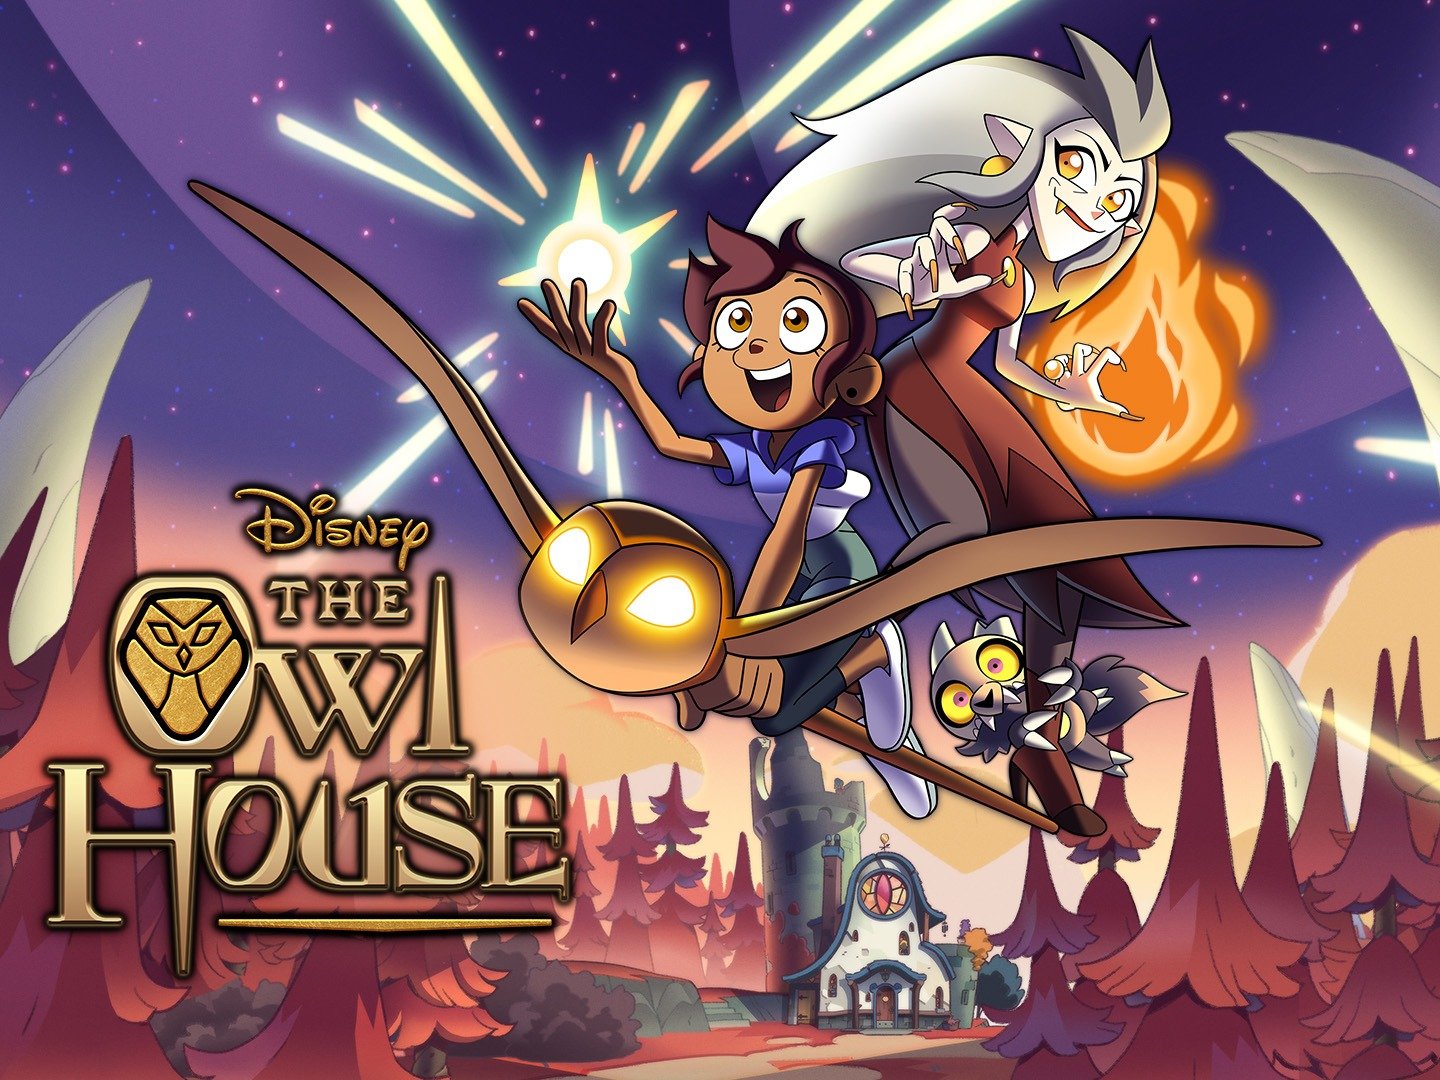 Why The Owl House Was Canceled After Season 3